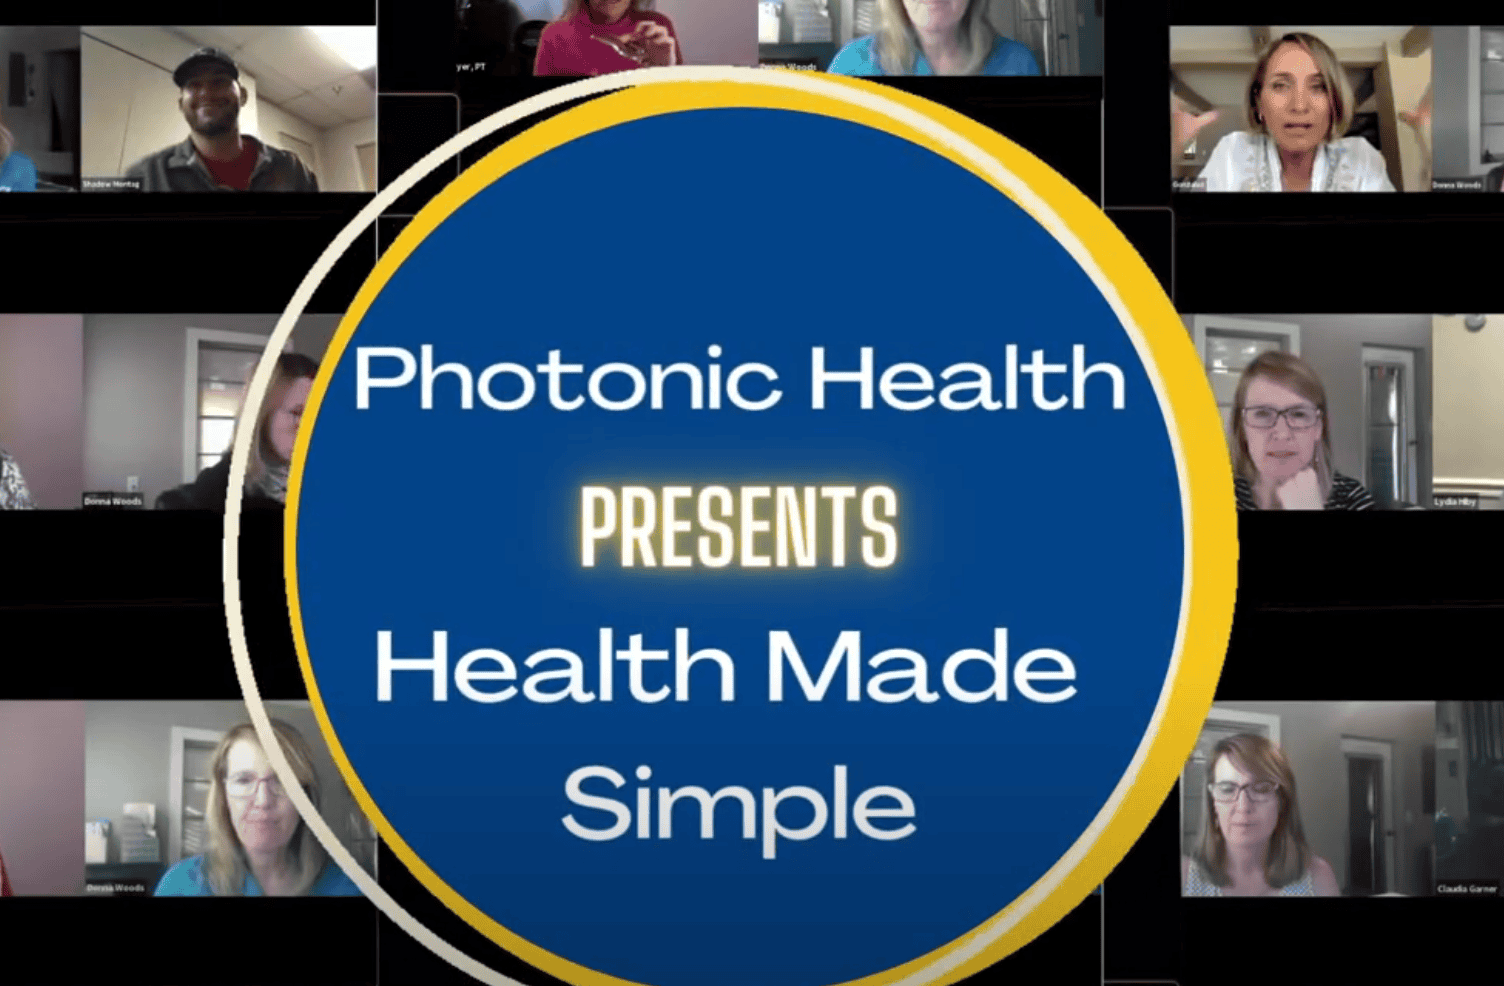 Health Made Simple: Andrea Gillespie